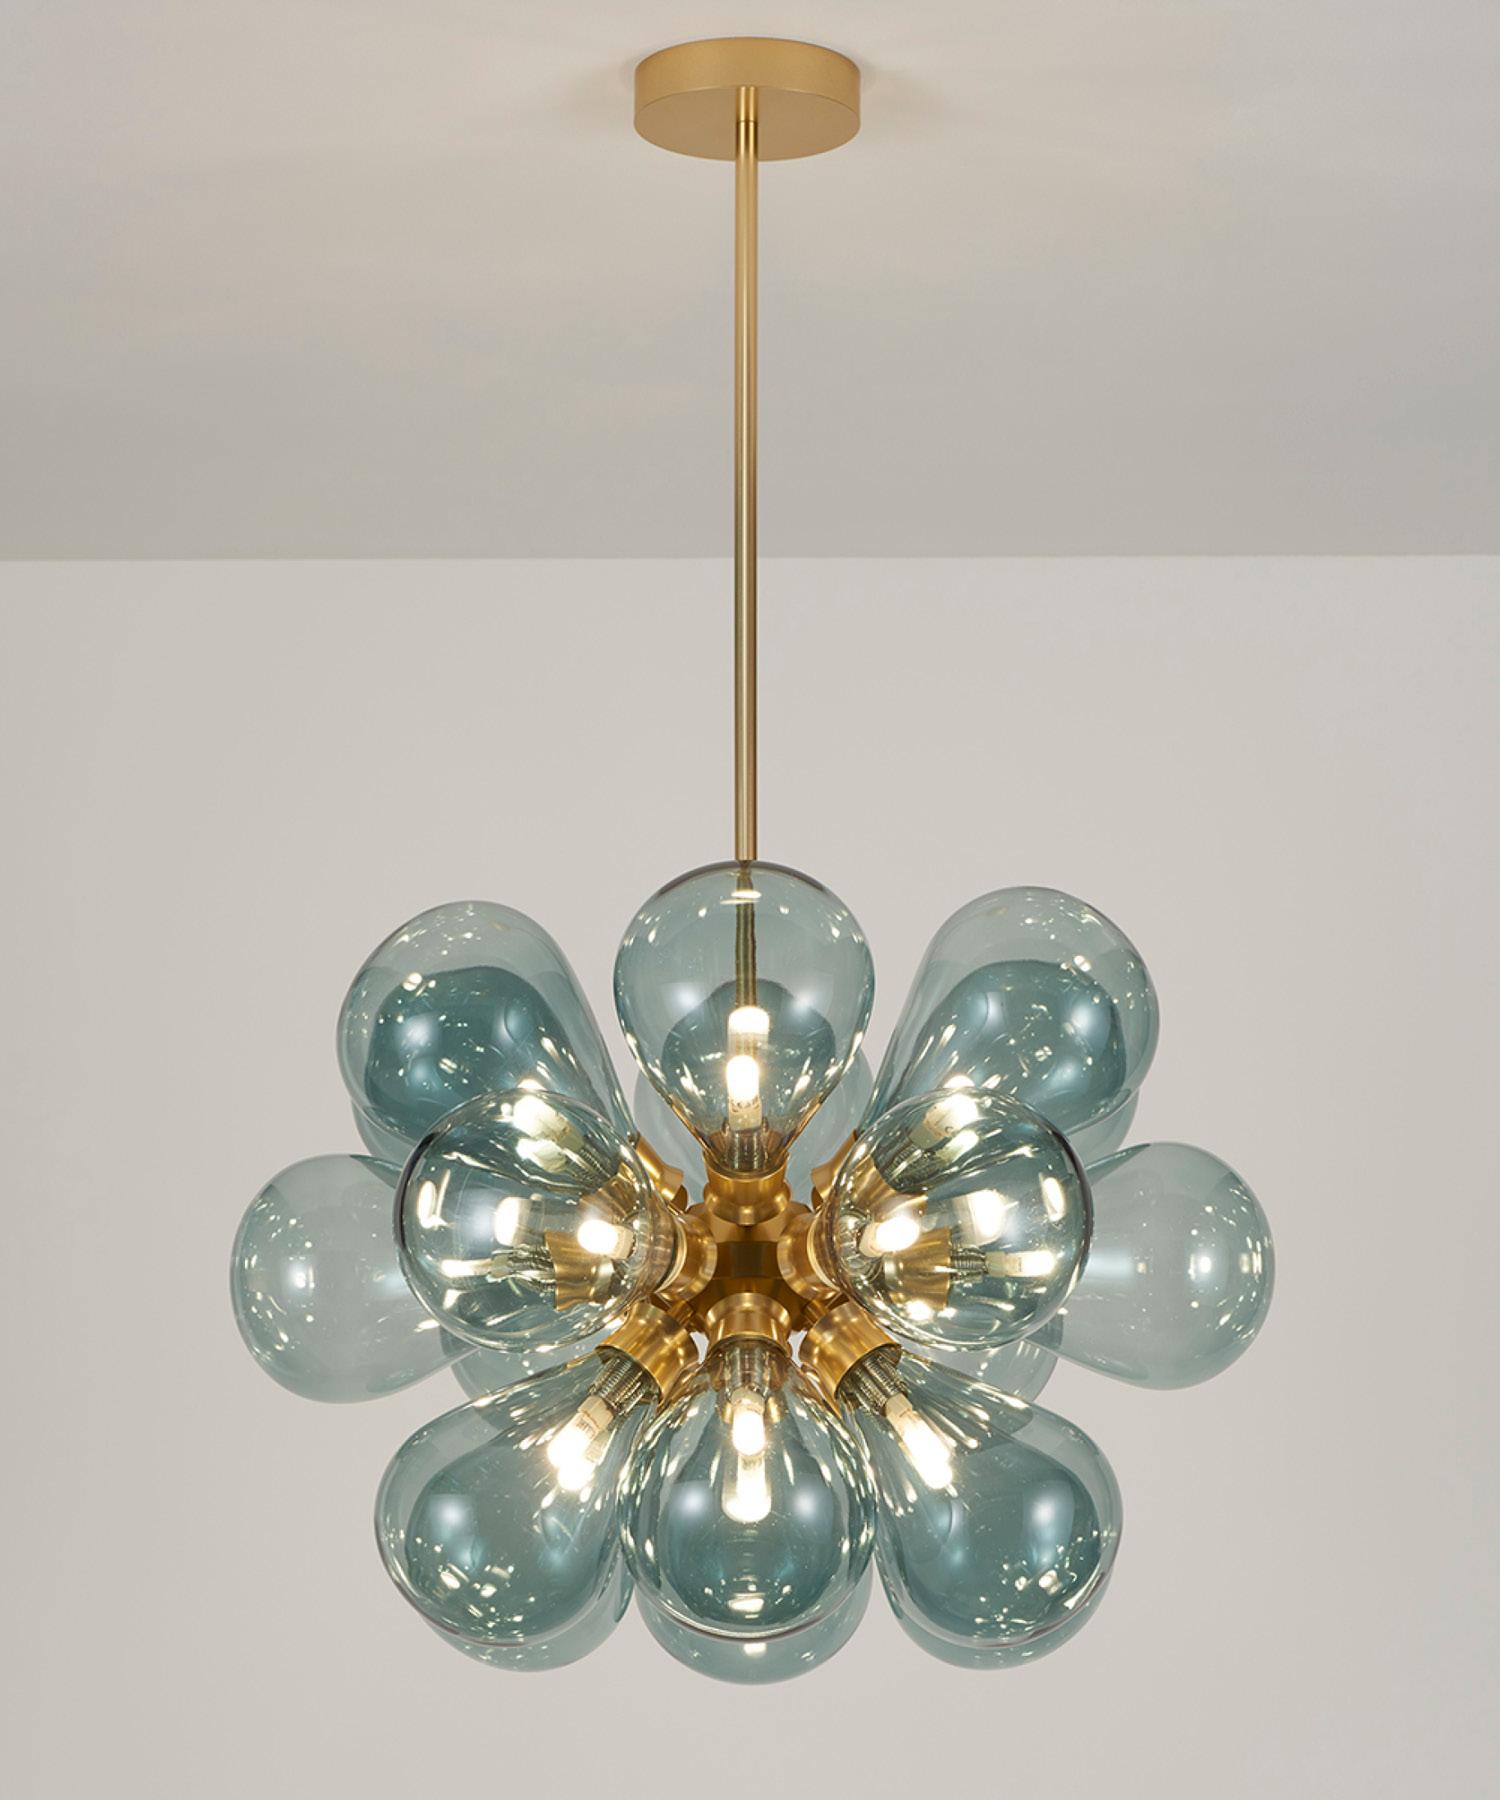 Cintola Maxi Pendant in Polished Aluminium with 18 Smoke Grey Handblown Globes In New Condition For Sale In London, GB